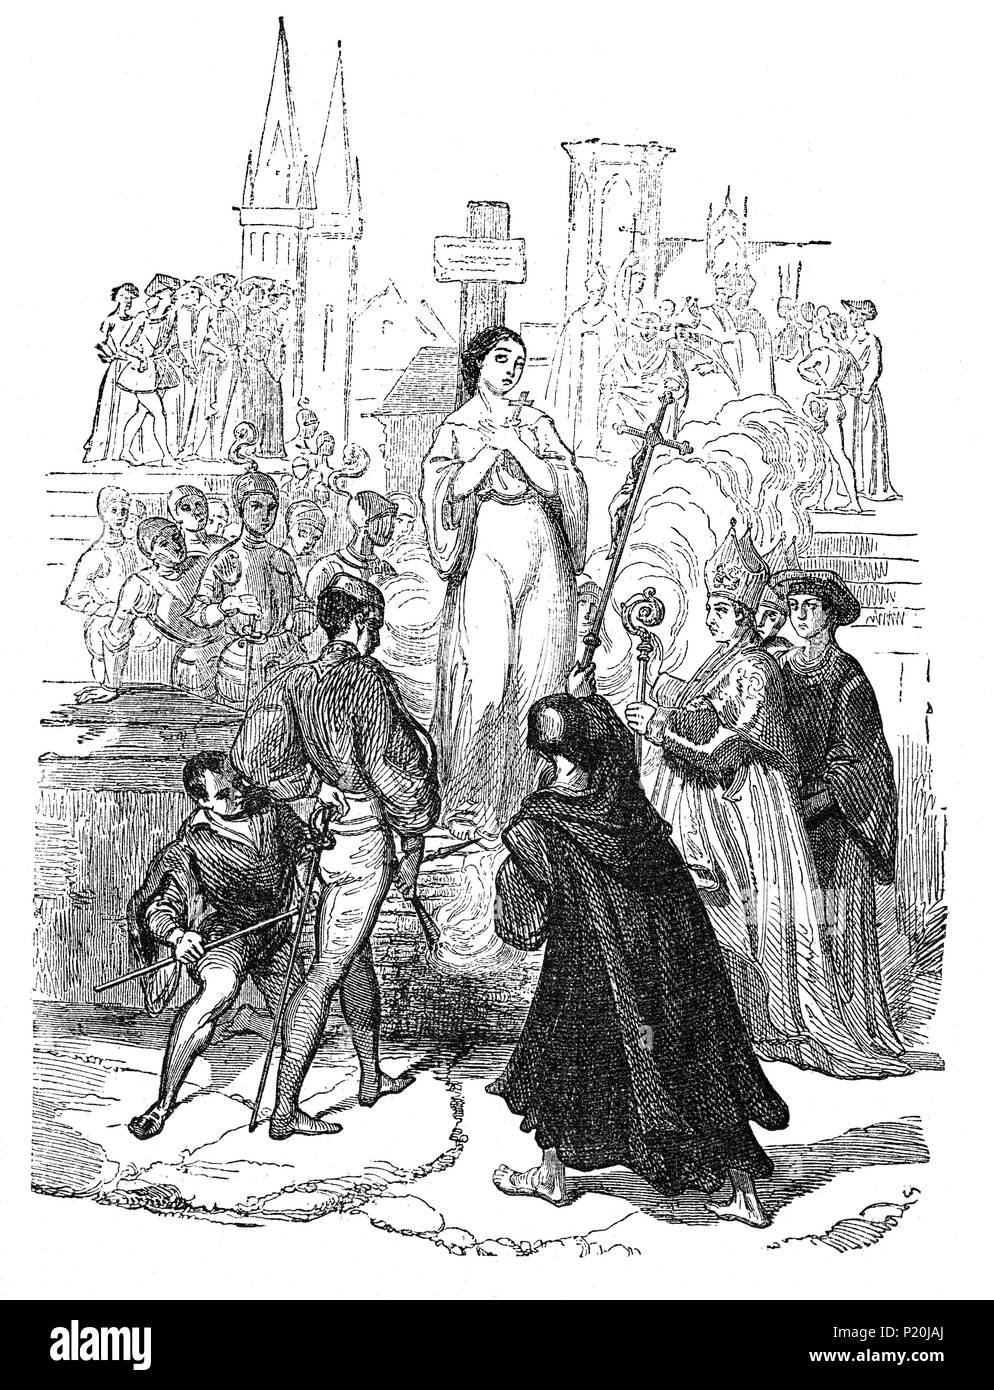 The execution of Joan Of Arc (1412-1431), aka 'The Maid of Orléans' by burning on 30 May 1431. Tied to a tall pillar at the Vieux-Marché in Rouen, she asked two of the clergy, Fr Martin Ladvenu and Fr Isambart de la Pierre, to hold a crucifix before her. An English soldier also constructed a small cross that she put in the front of her dress. The English burned the body twice more, to reduce it to ashes and prevent any collection of relics, and cast her remains into the Seine River. Stock Photo